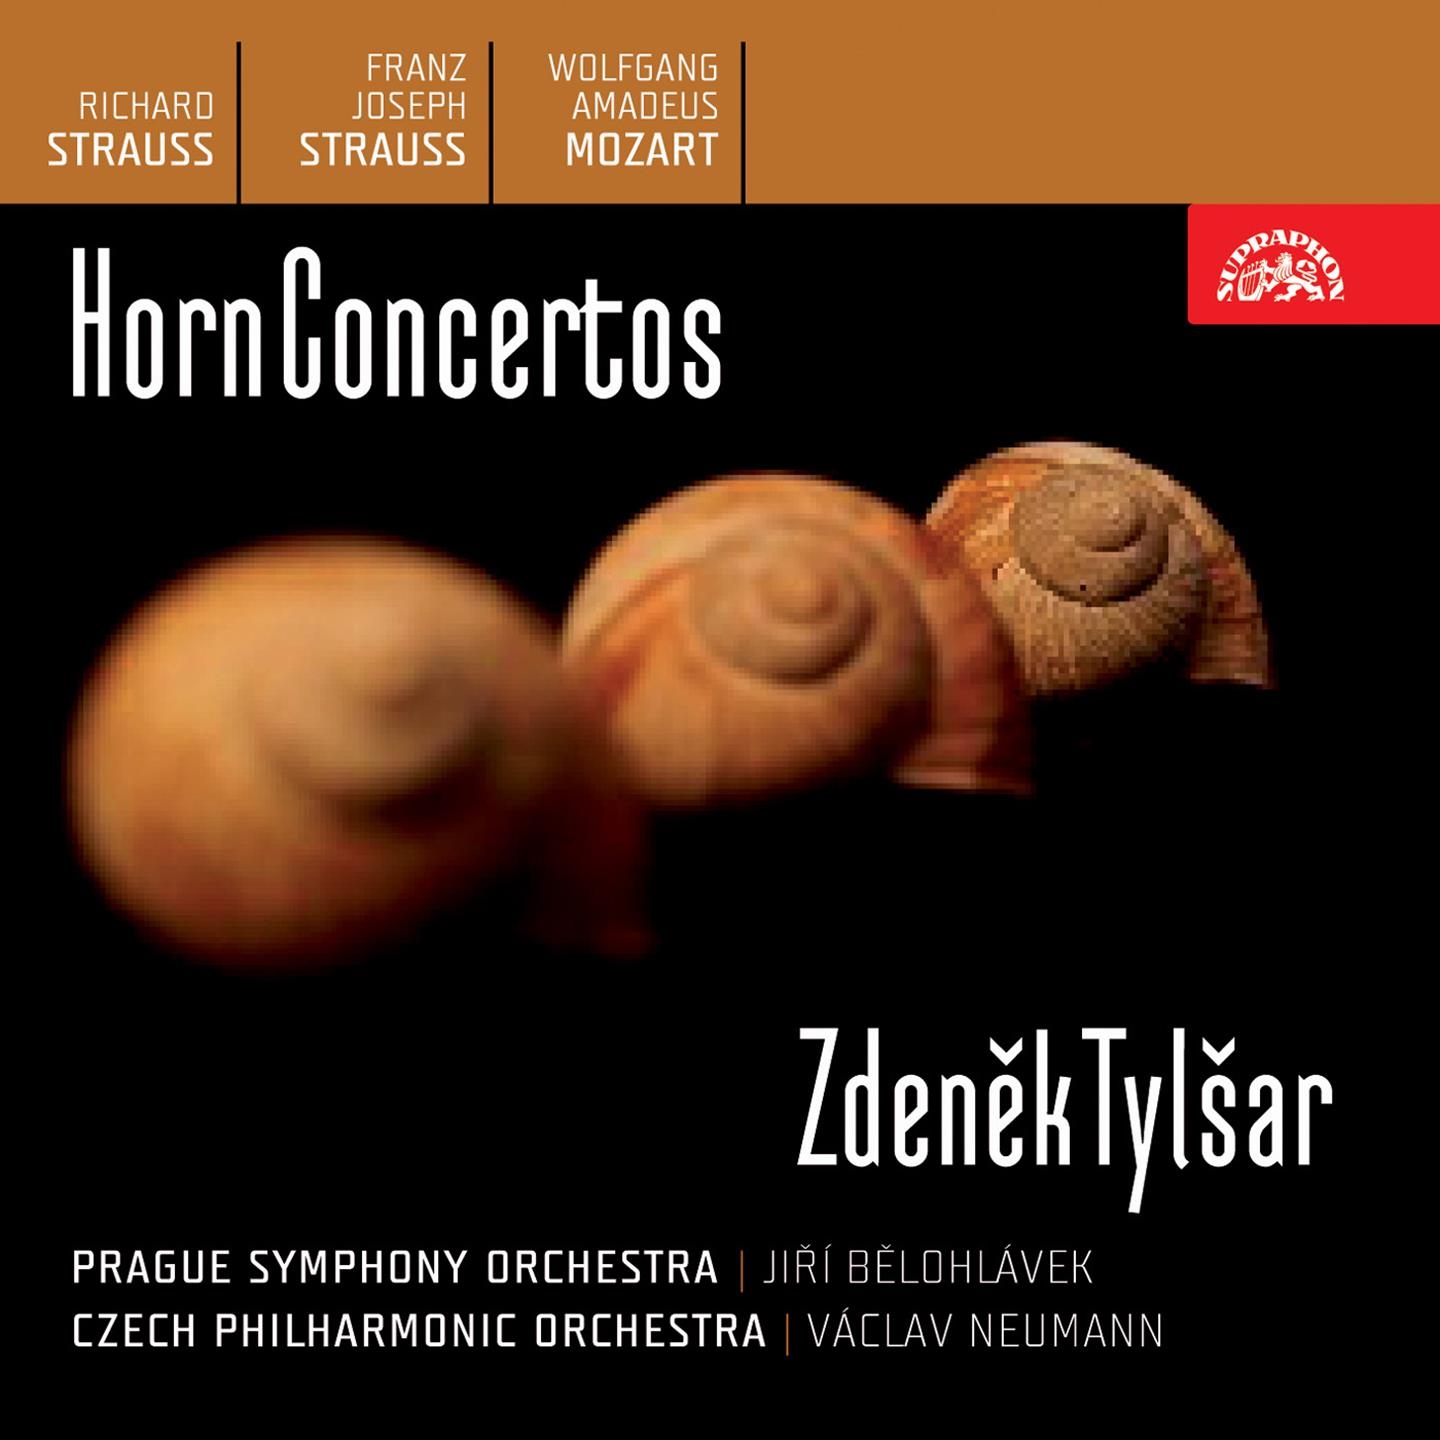 Concerto for French Horn and Orchestra No. 2 in E-Flat Major, .: I. Allegro /att./